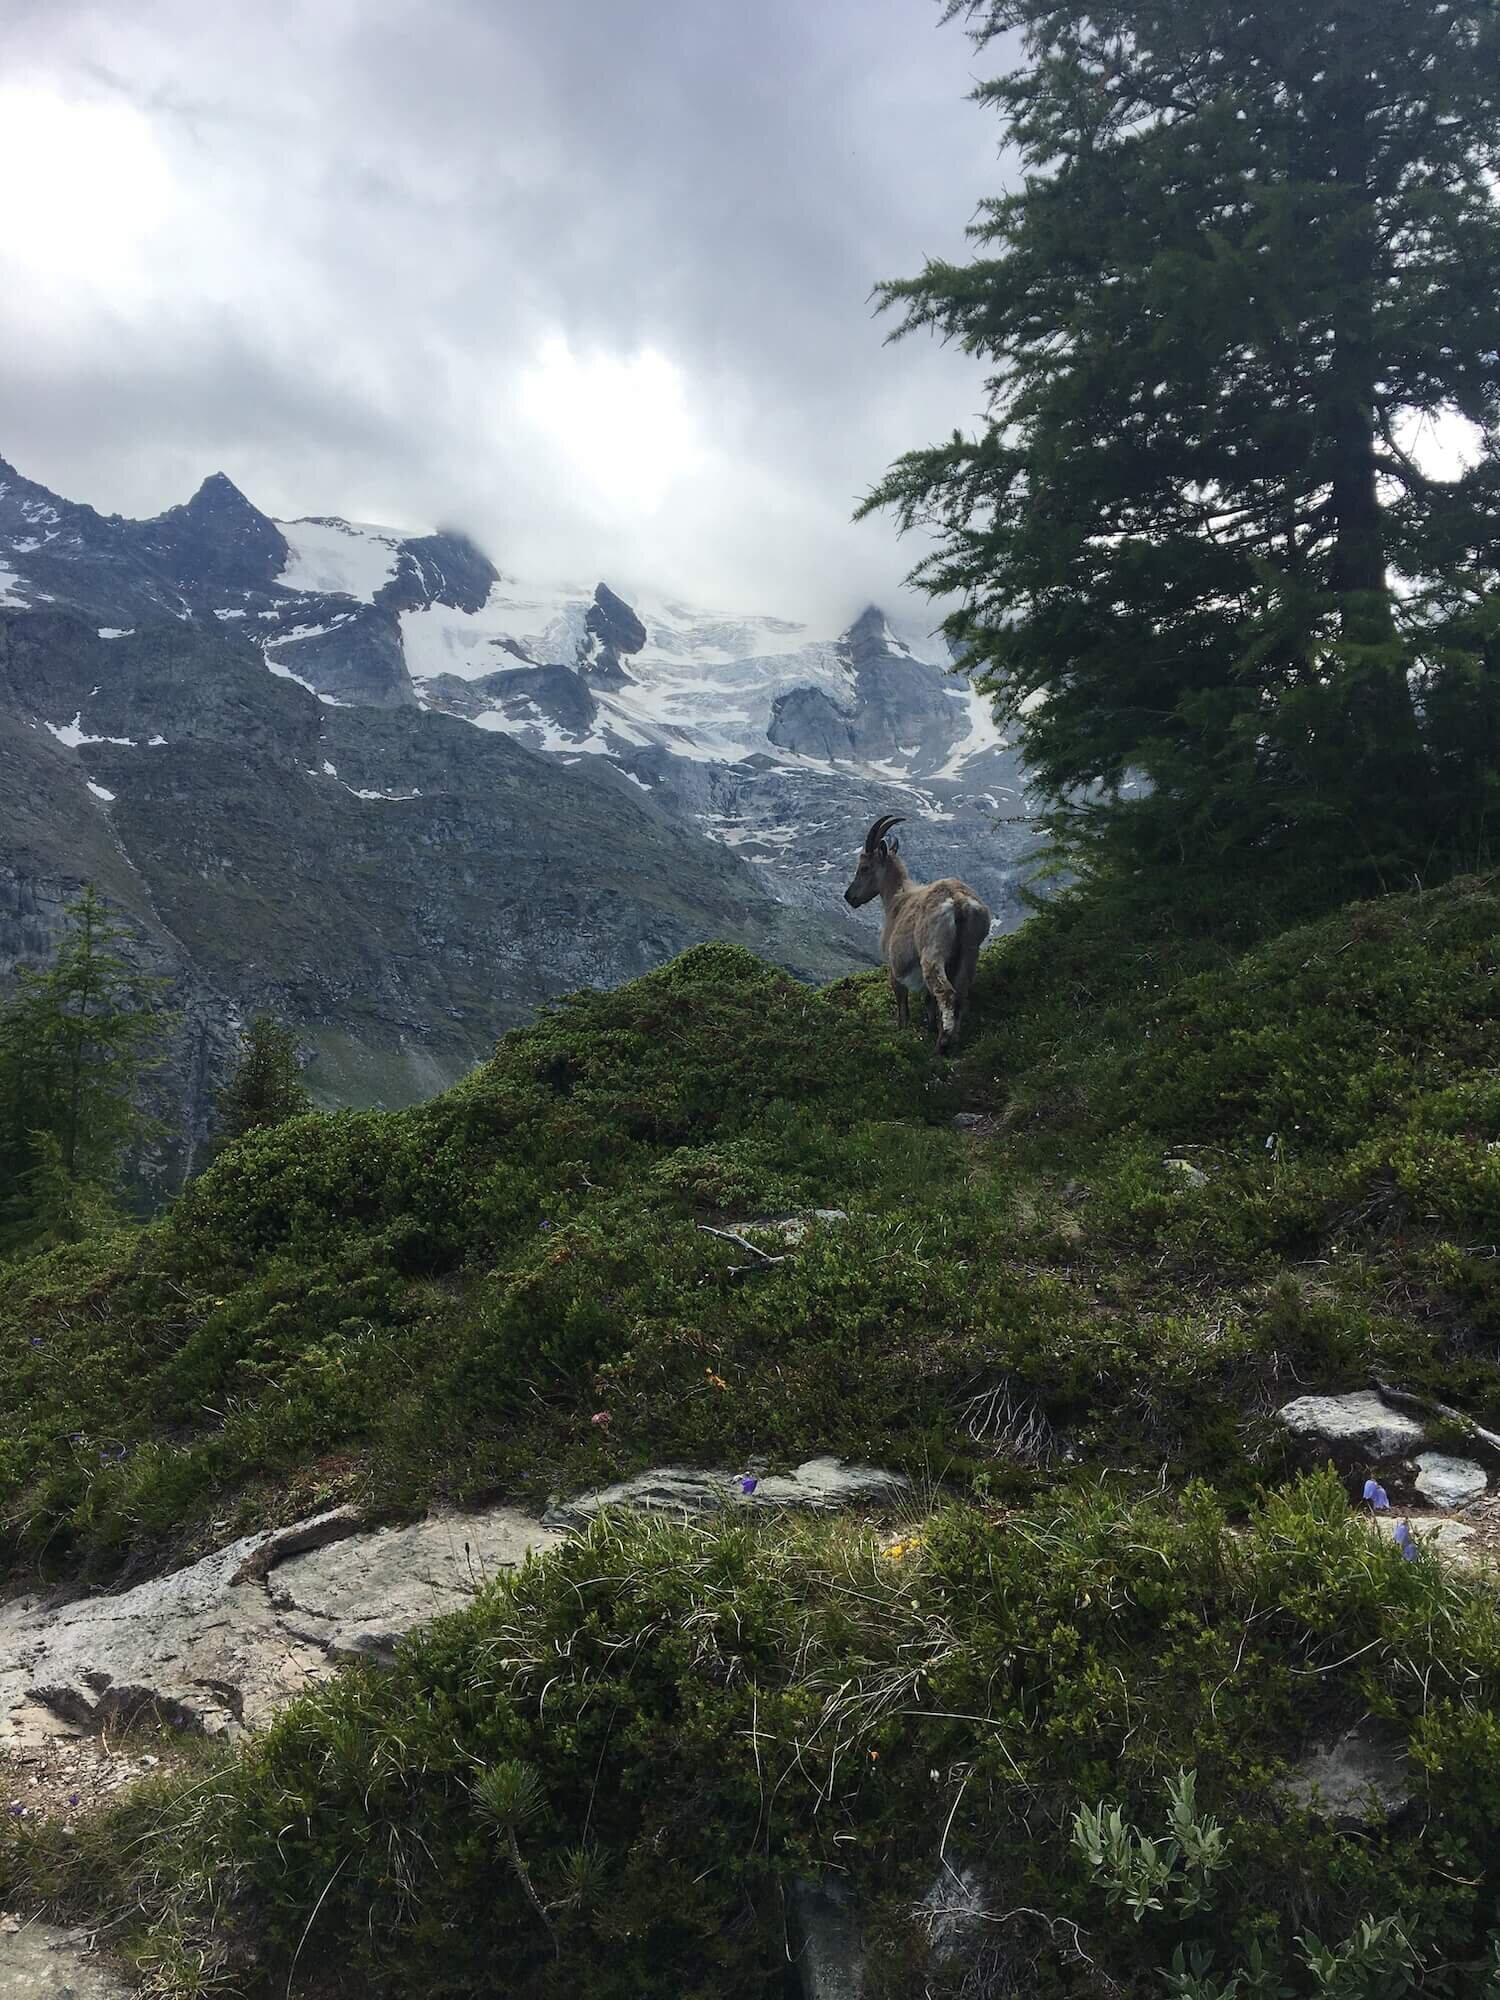 Ibex can be found along the Hohenweg